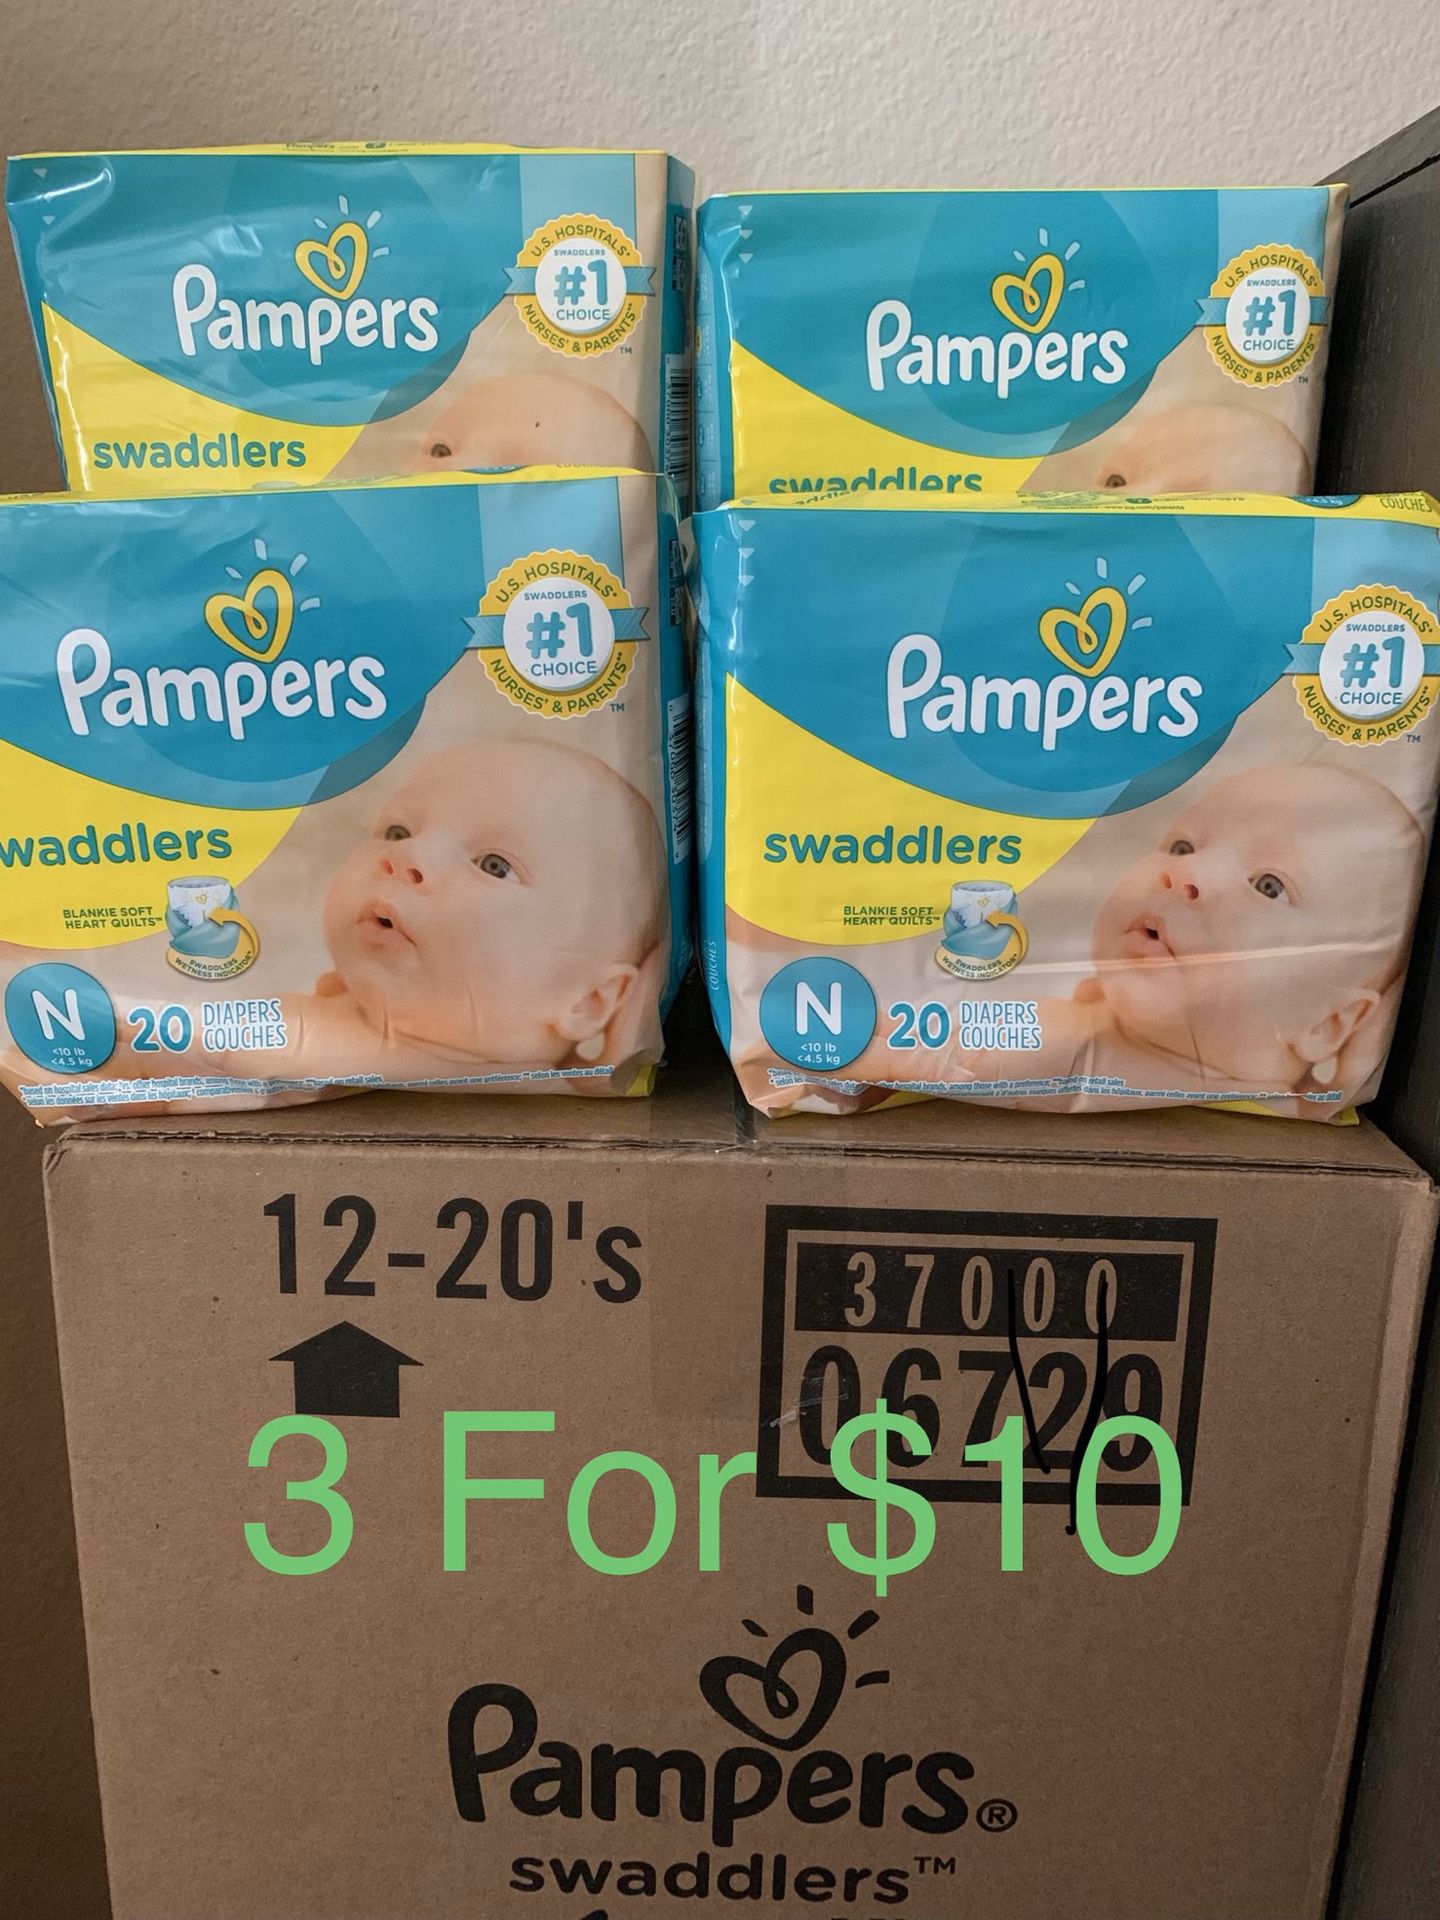 Pampers Swaddlers Newborn Diapers. 3 Bags for $10